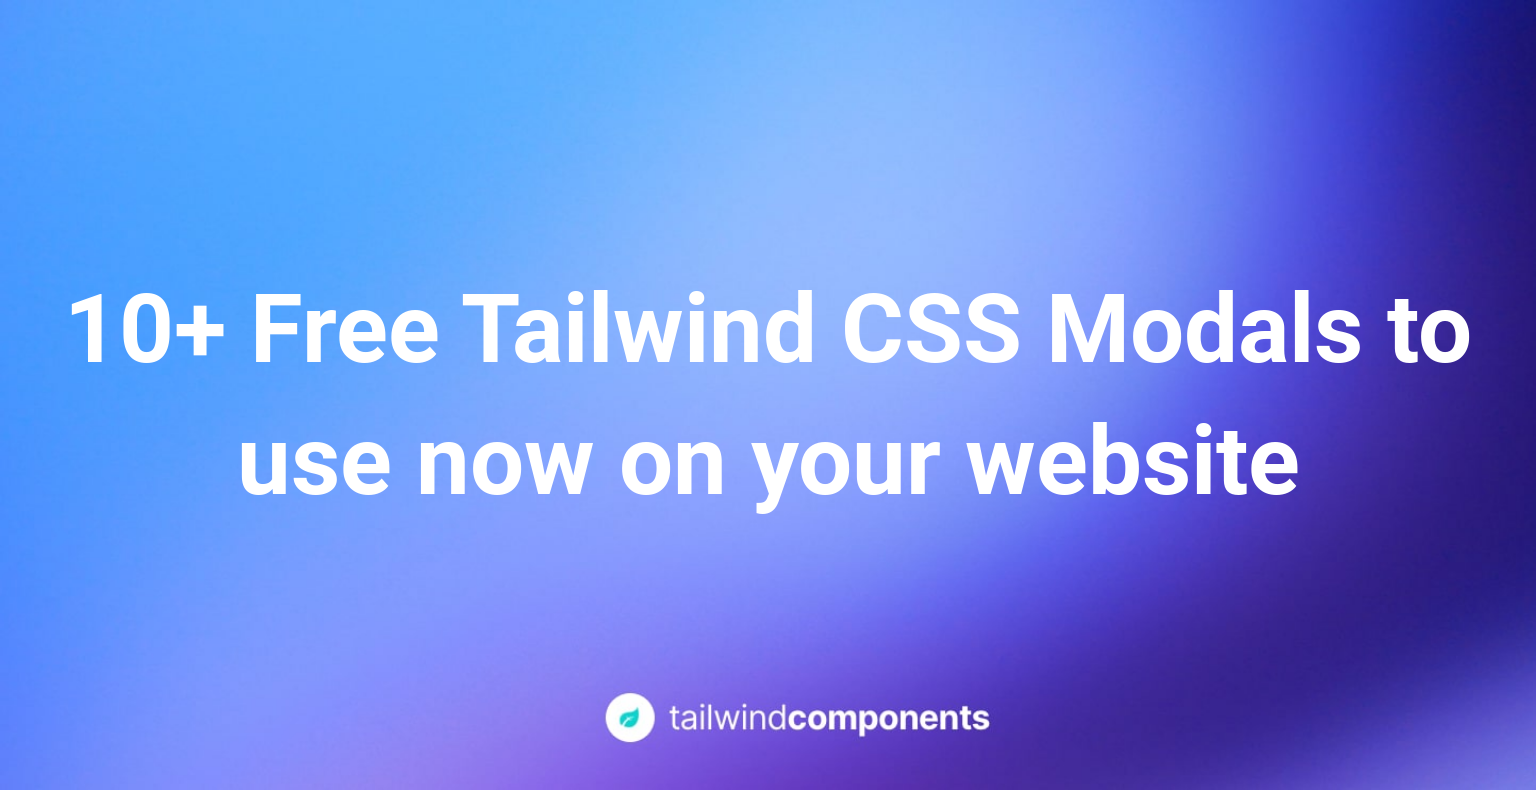 10+ Free Tailwind CSS Modals to use now on your website Image